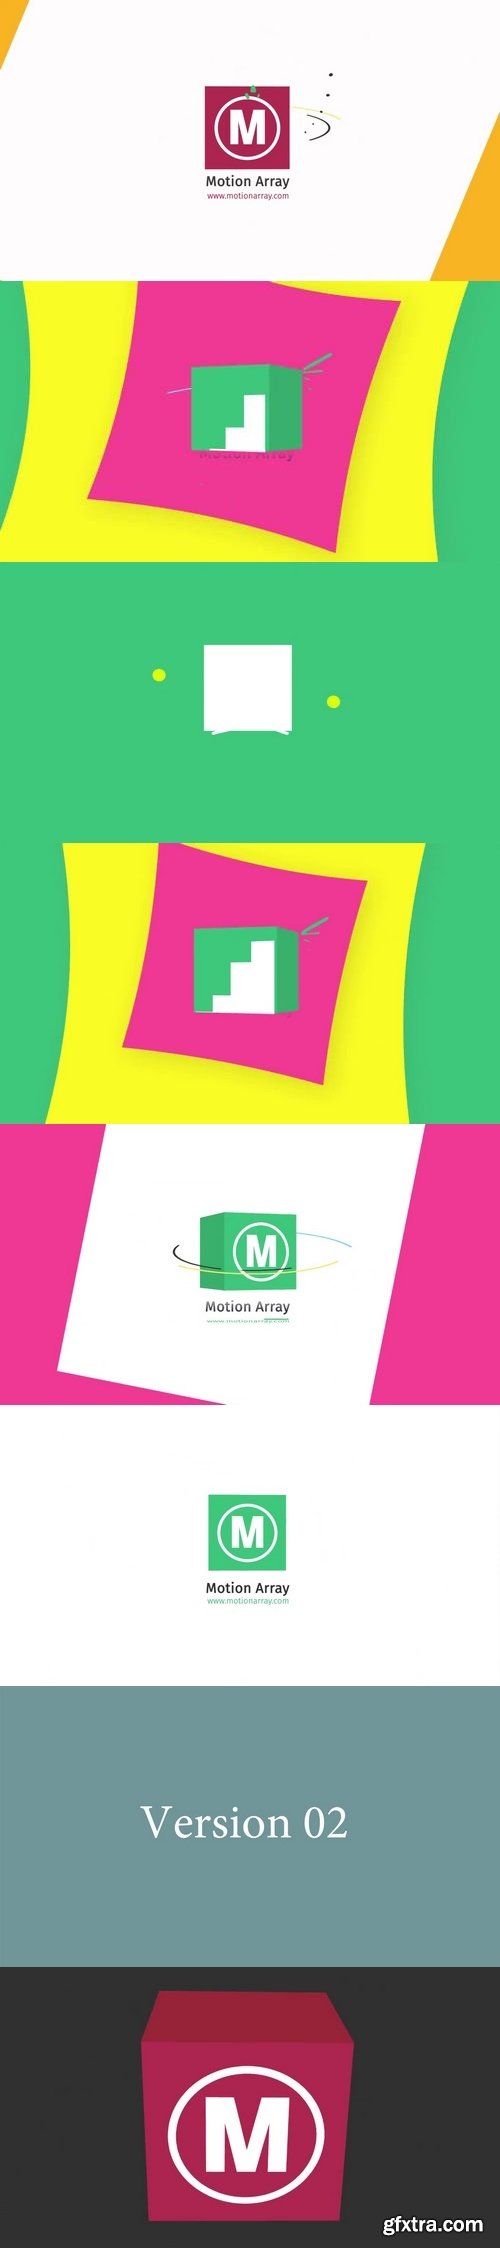 MA - 3d Cube Minimal Logo After Effects Templates 57727